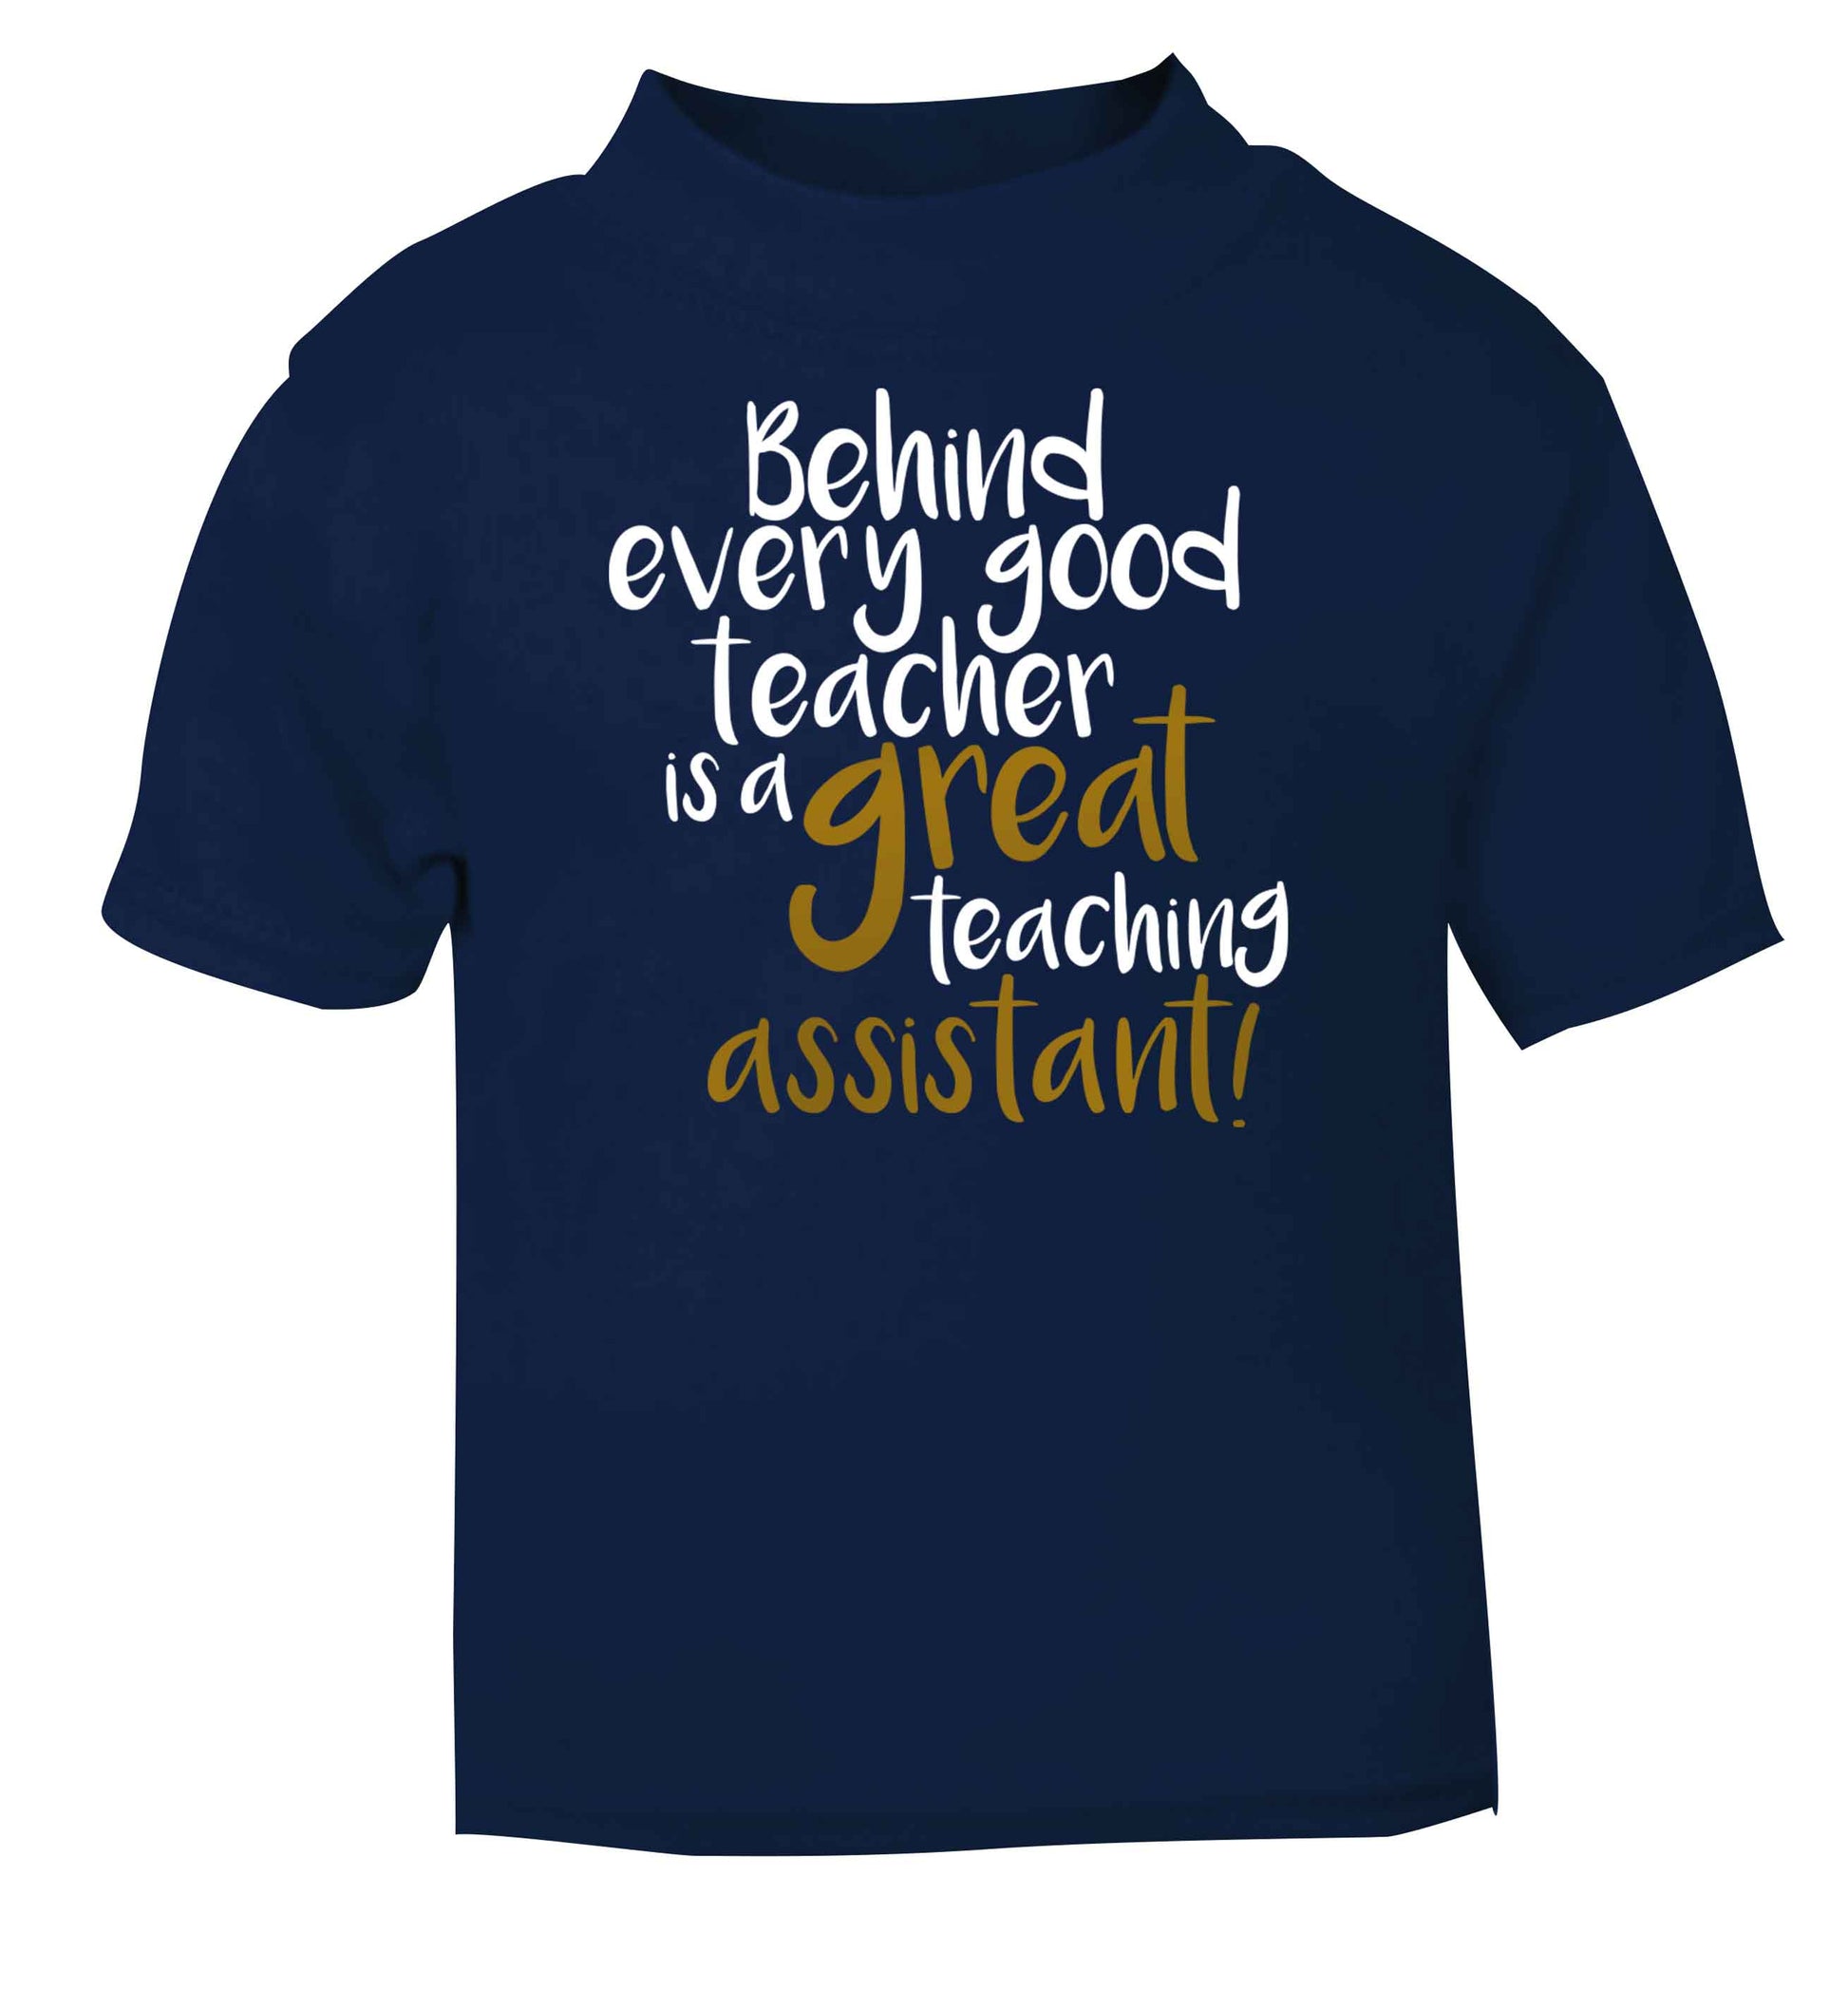 Behind every good teacher is a great teaching assistant navy baby toddler Tshirt 2 Years